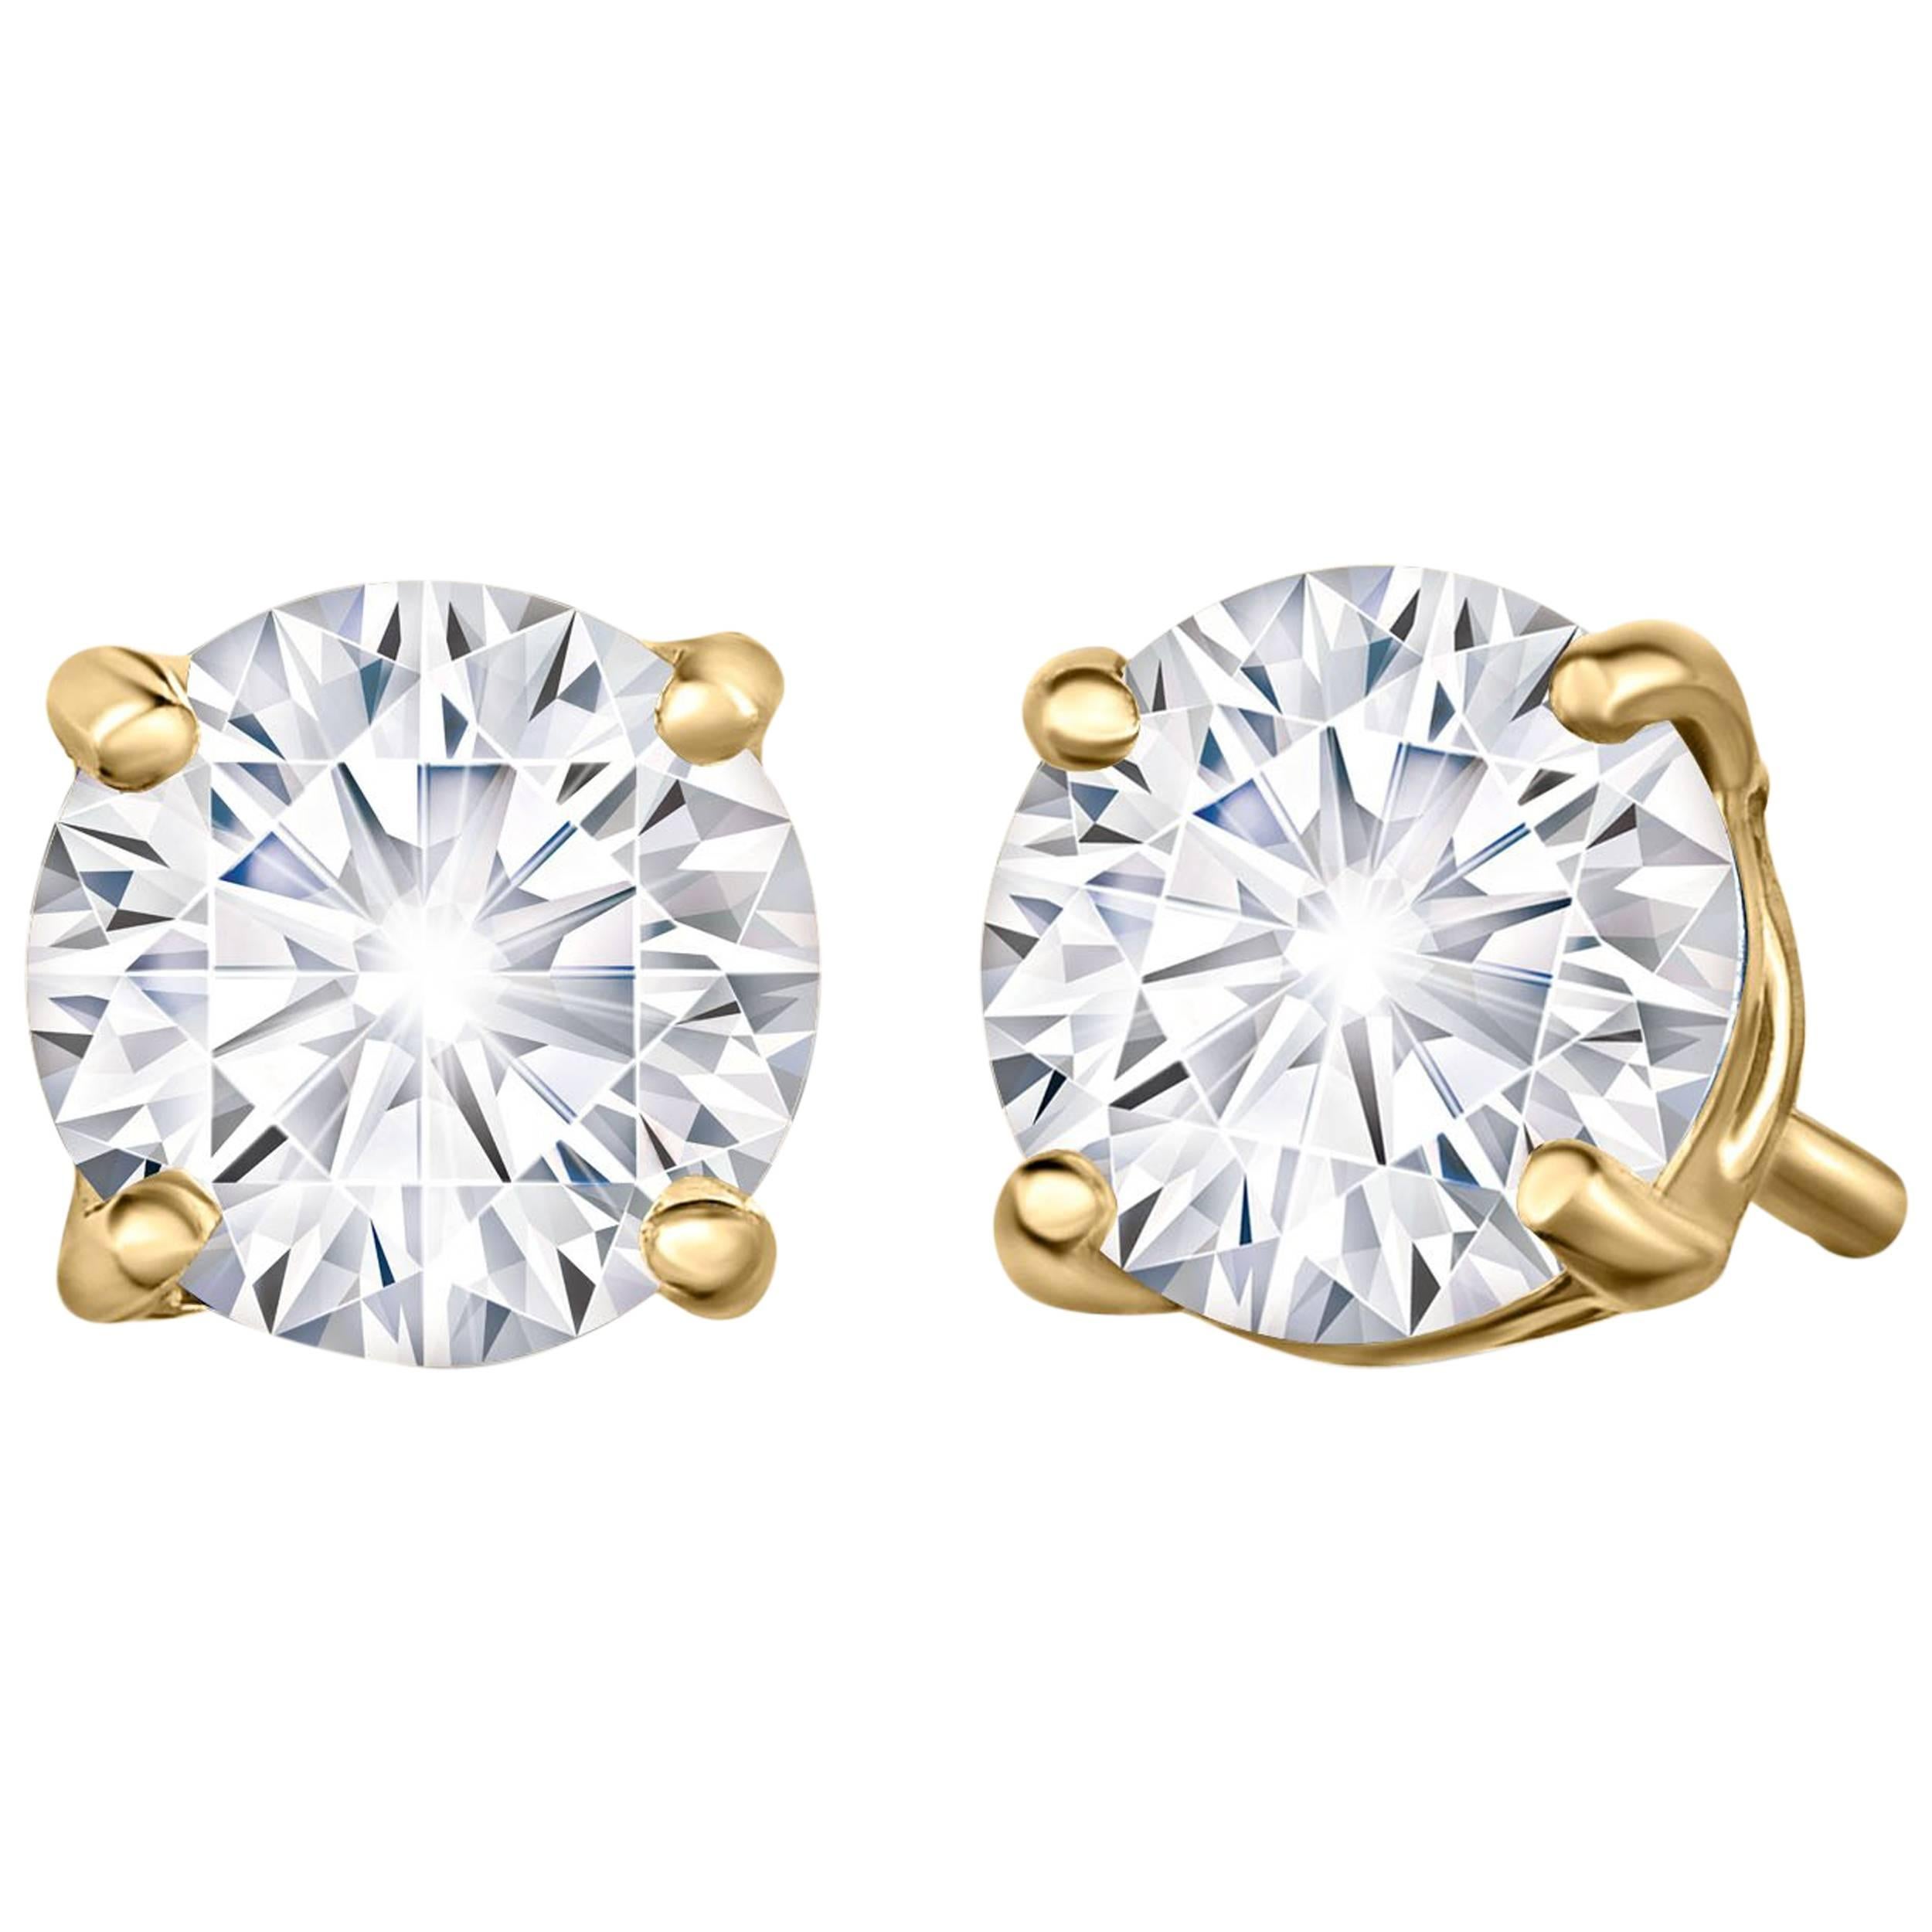 Marisa Perry 70 Point Forevermark Diamond Studs in Yellow Gold